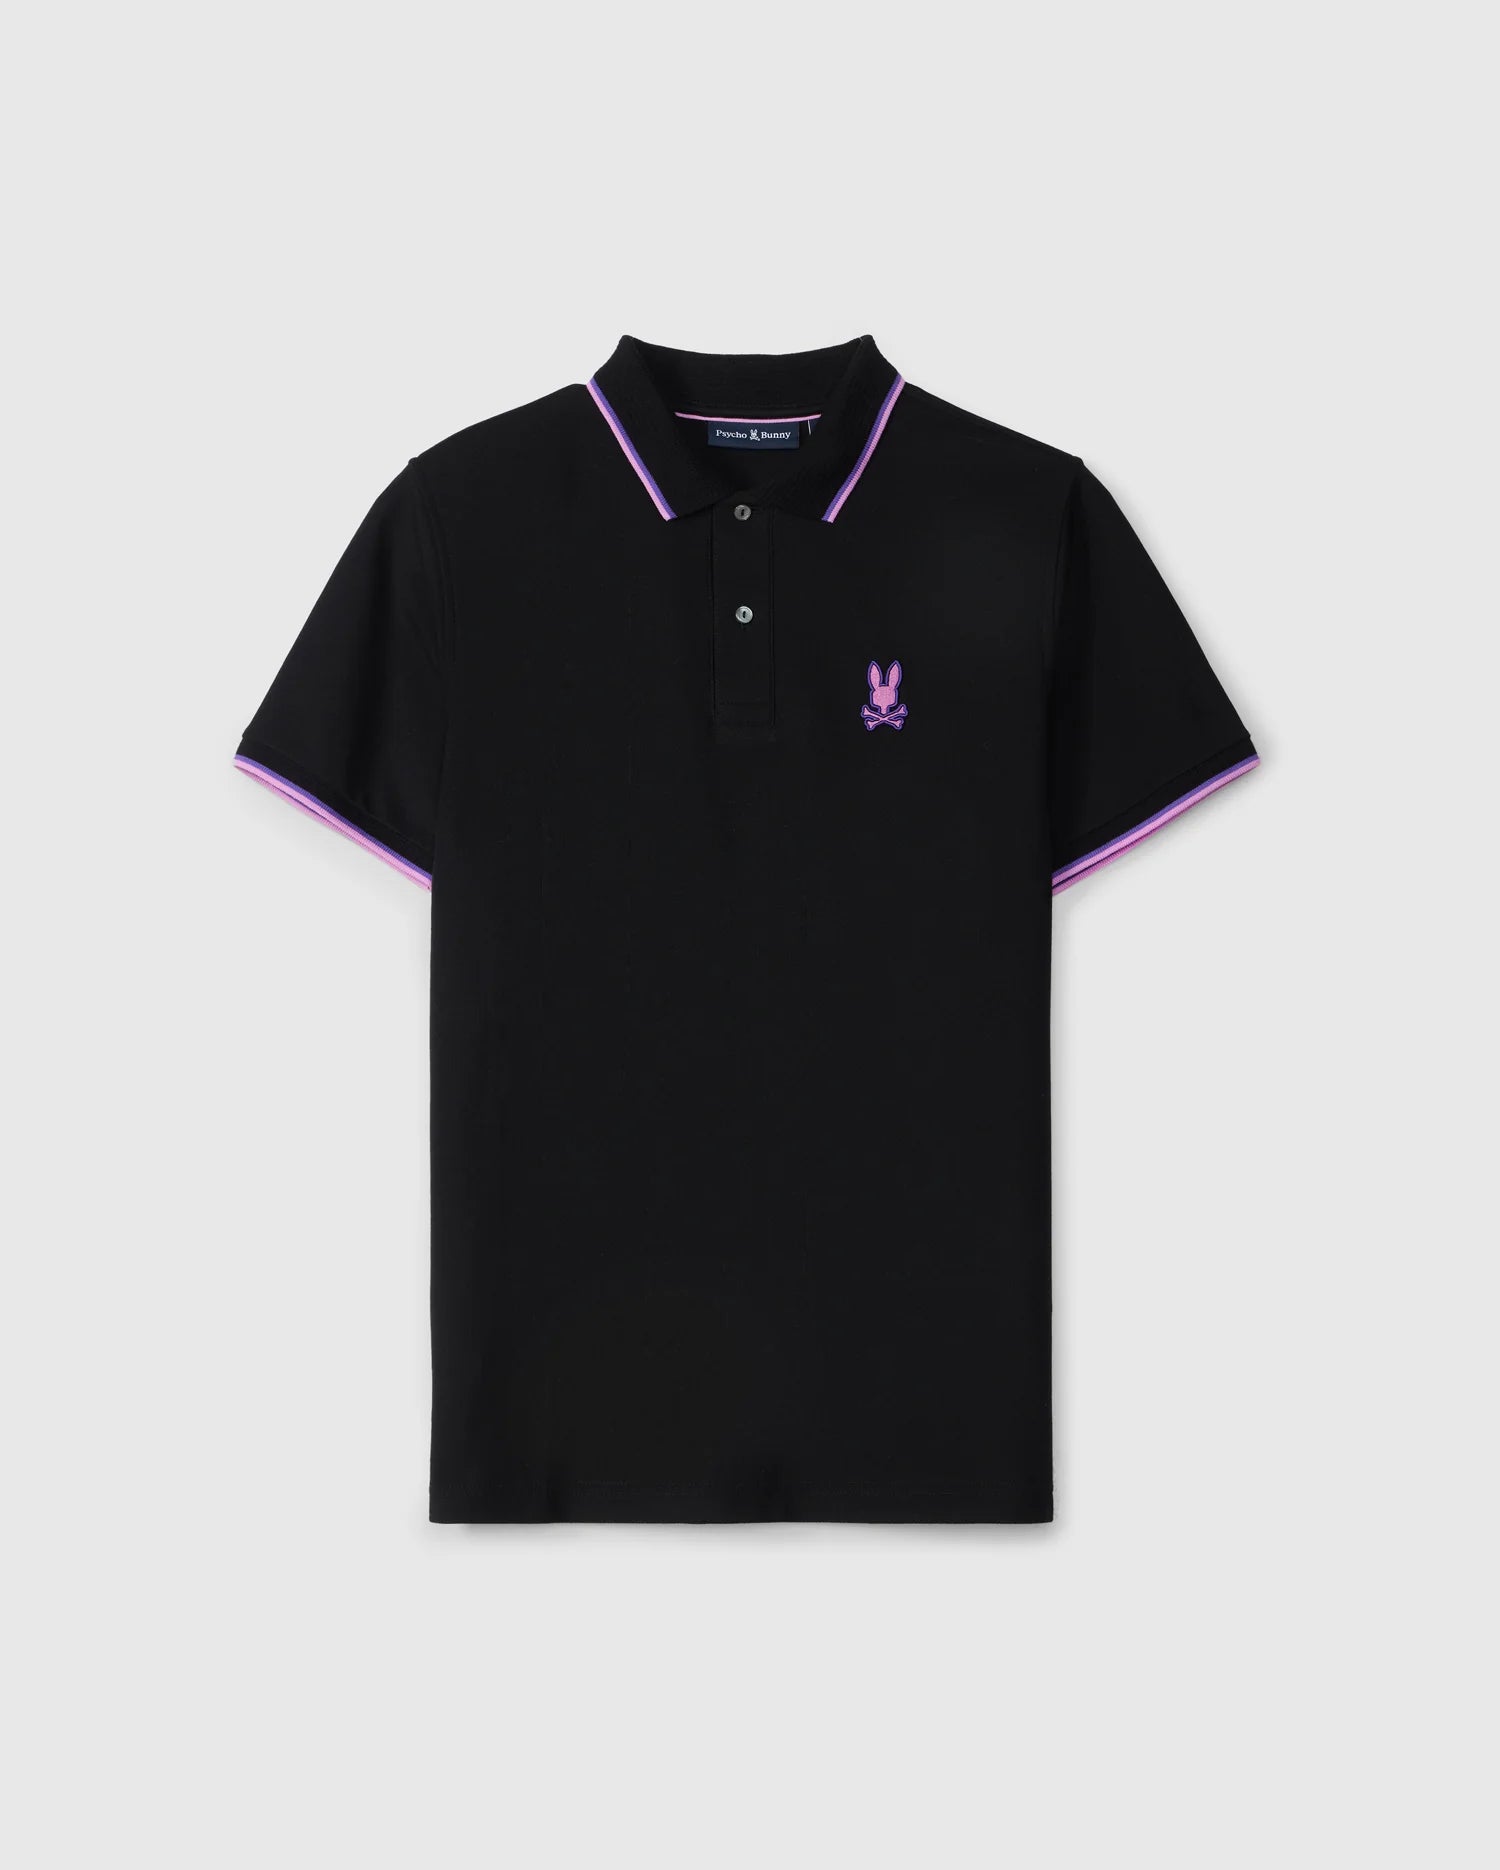 A black MENS HOUSTON PIQUE POLO SHIRT - B6K604C200 with a purple embroidered Bunny design featuring crossbones on the left chest. The shirt has a collar with purple trimming, mother-of-pearl buttons on the placket, and purple accents on the sleeves by Psycho Bunny.